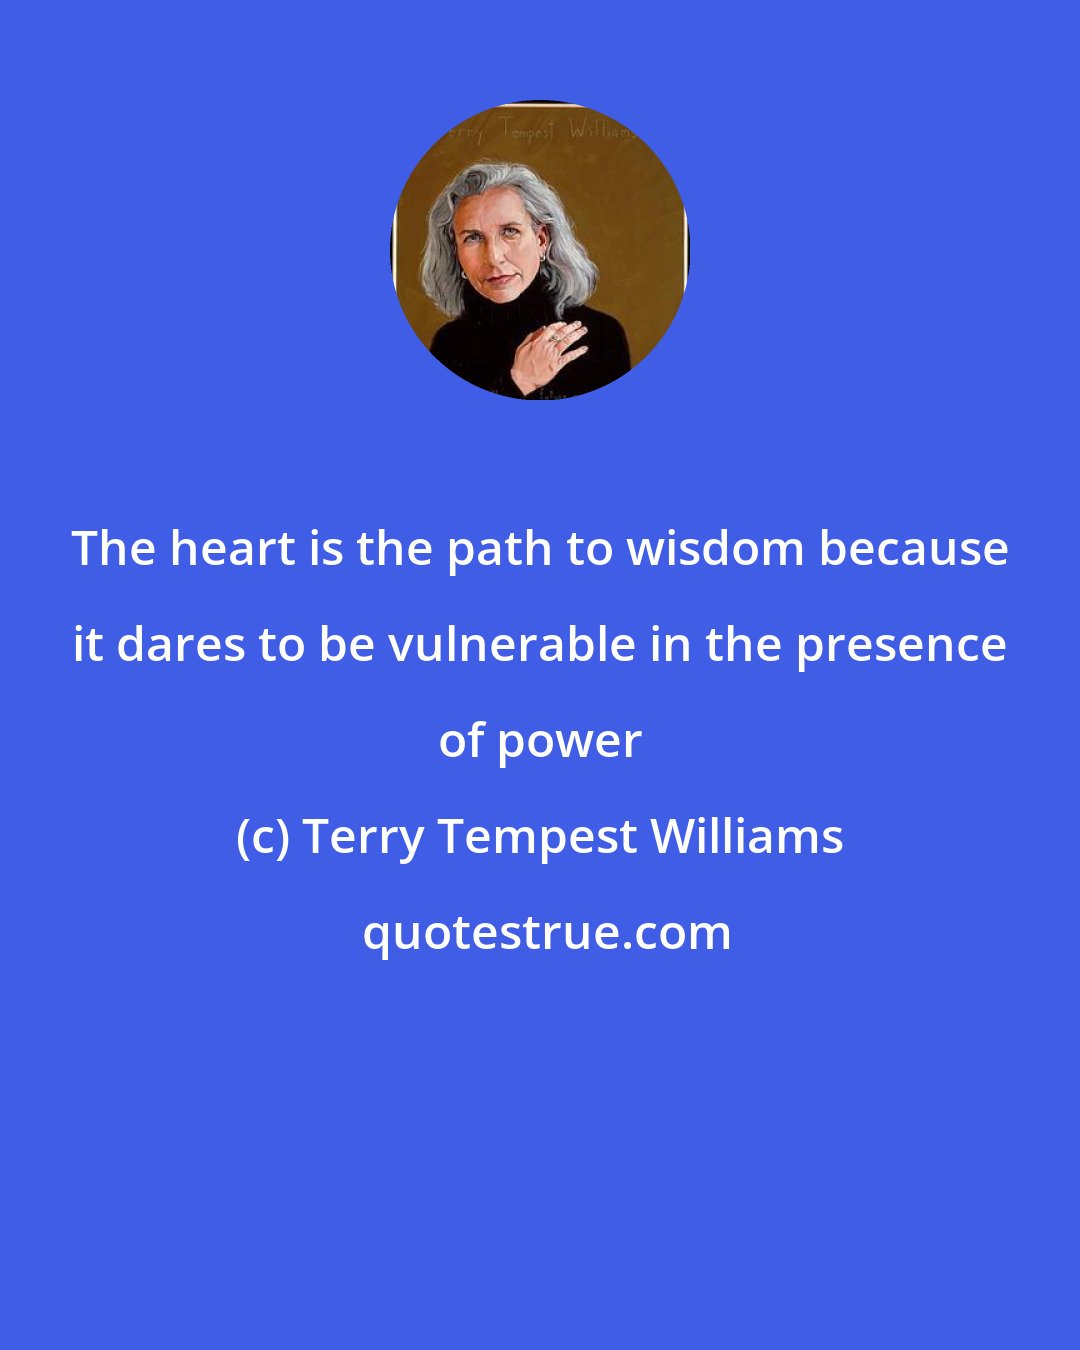 Terry Tempest Williams: The heart is the path to wisdom because it dares to be vulnerable in the presence of power